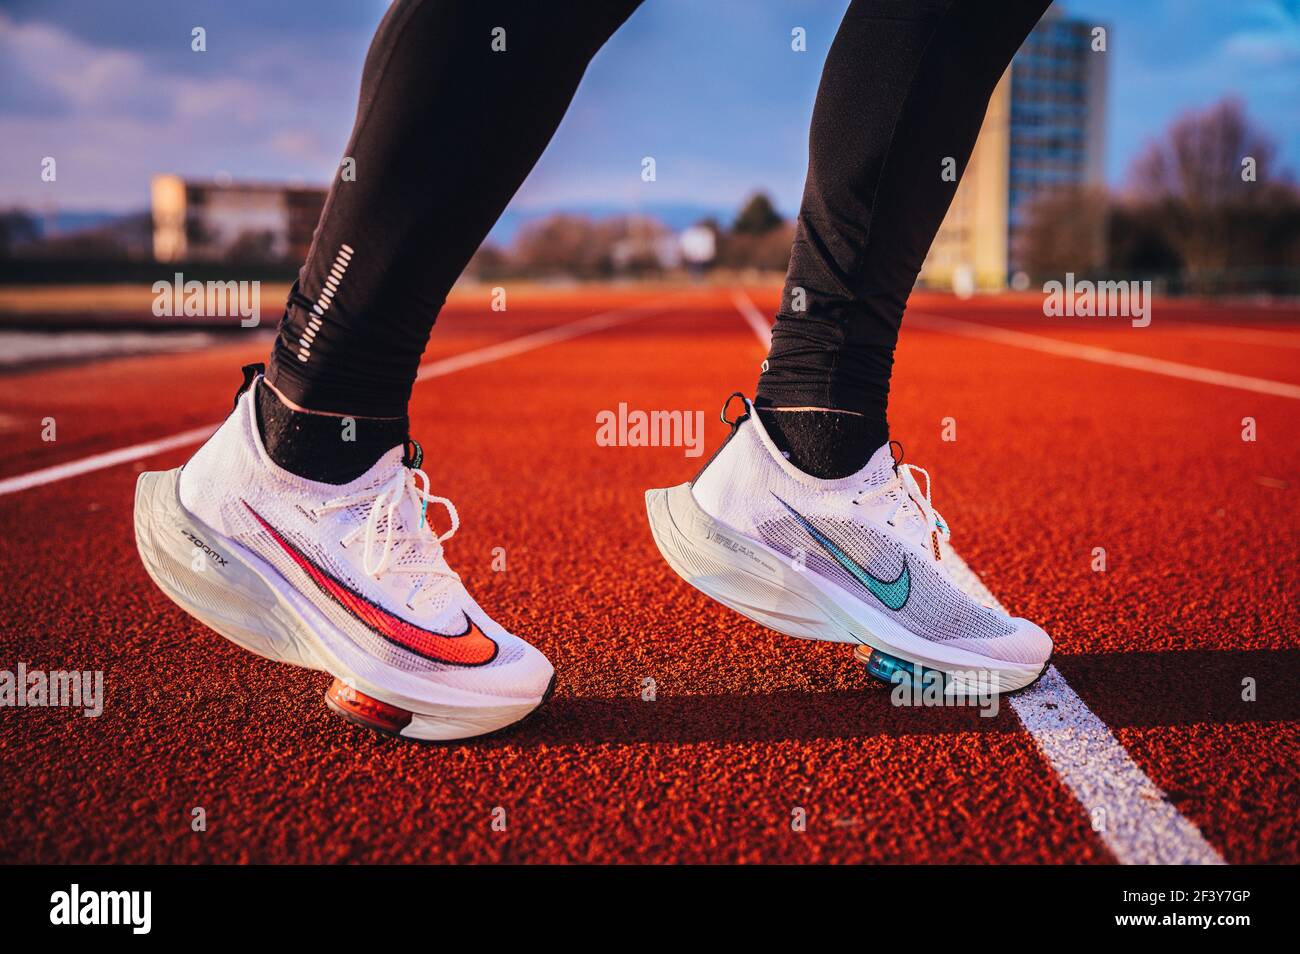 TOKYO, JAPAN, MARCH 18. 2021: running shoes ALPHAFLY NEXT%. Controversial athletics shoe on legs of professional athlete running on the road. Off Stock Photo - Alamy